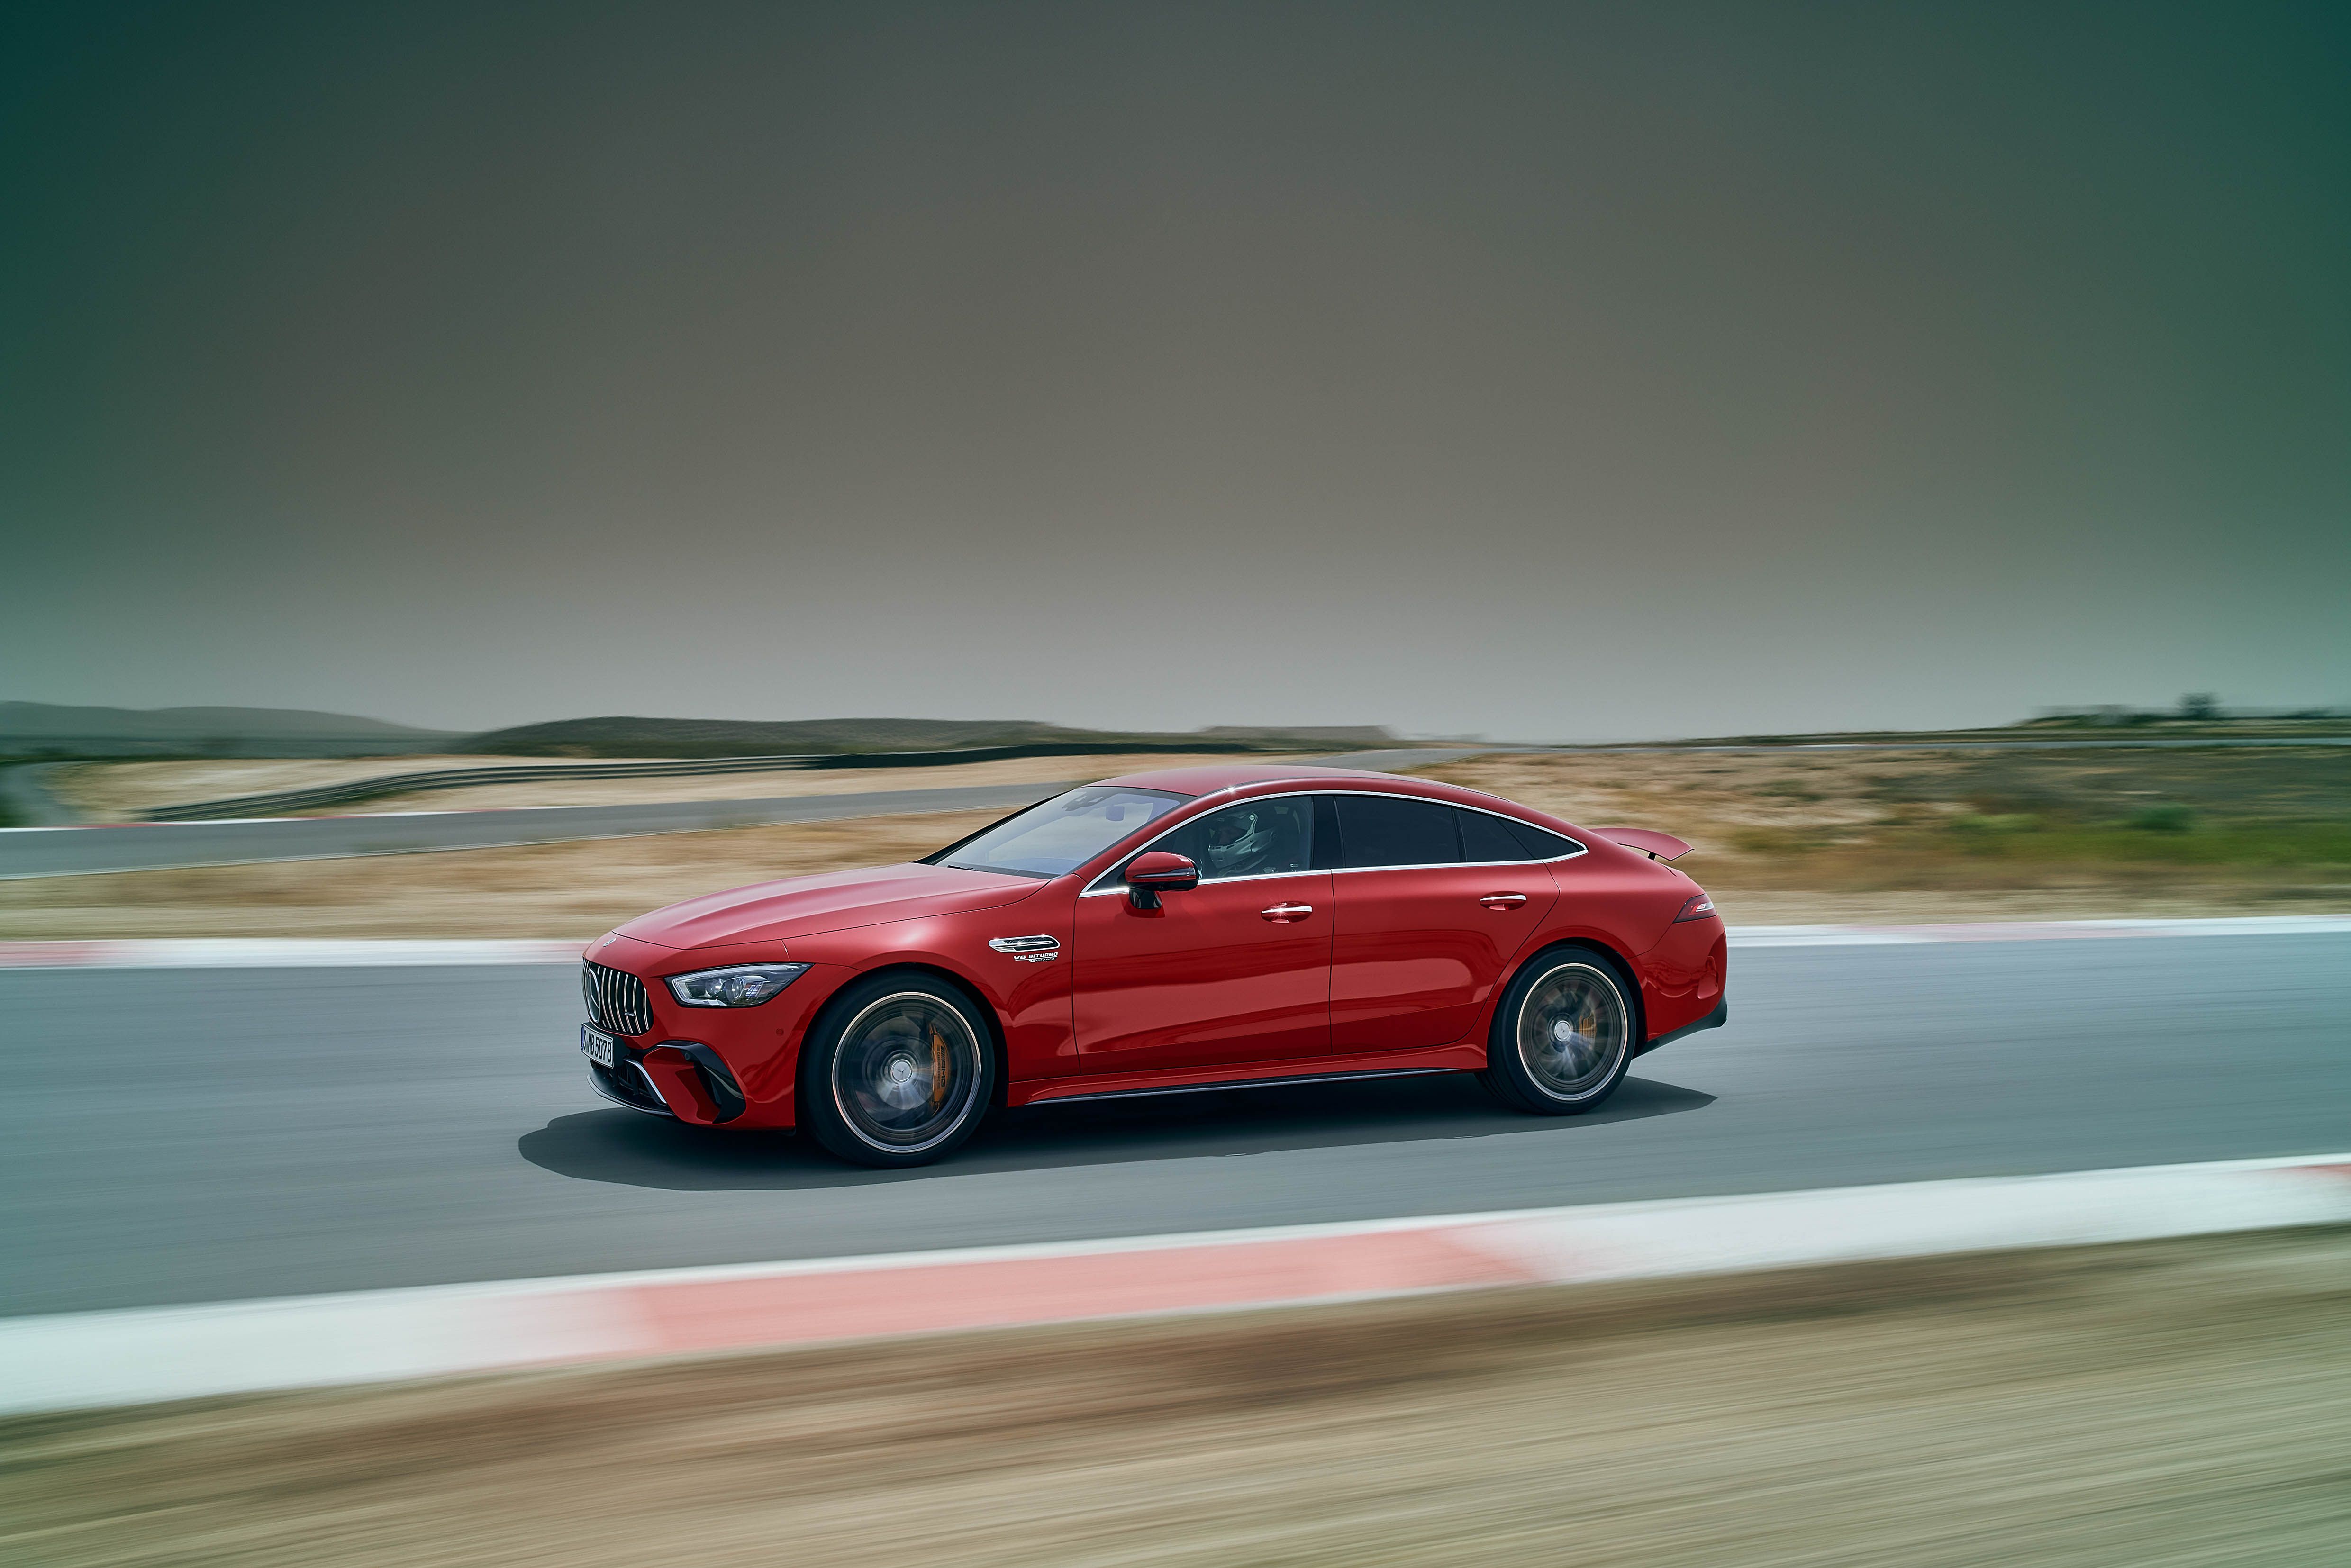 Mercedes AMG GT63 S E Performance review: bonkers PHEV driven in